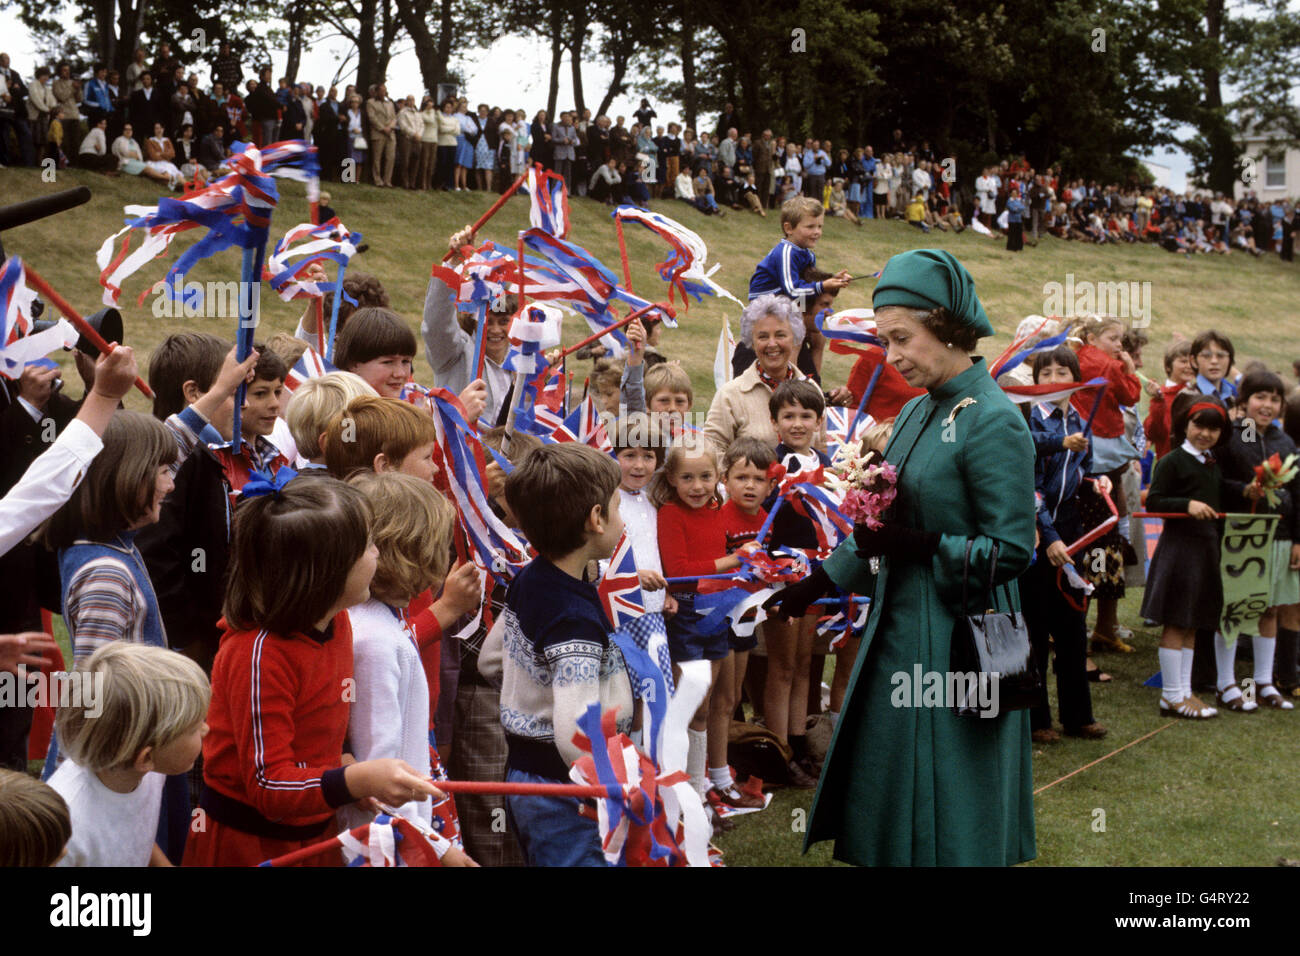 Queen Elizabeth II at a gathering of schoolchildren at Grainville, Saint Saviour, as she and the Duke of Edinburgh visited the island of Jersey, Channel Islands. Stock Photo